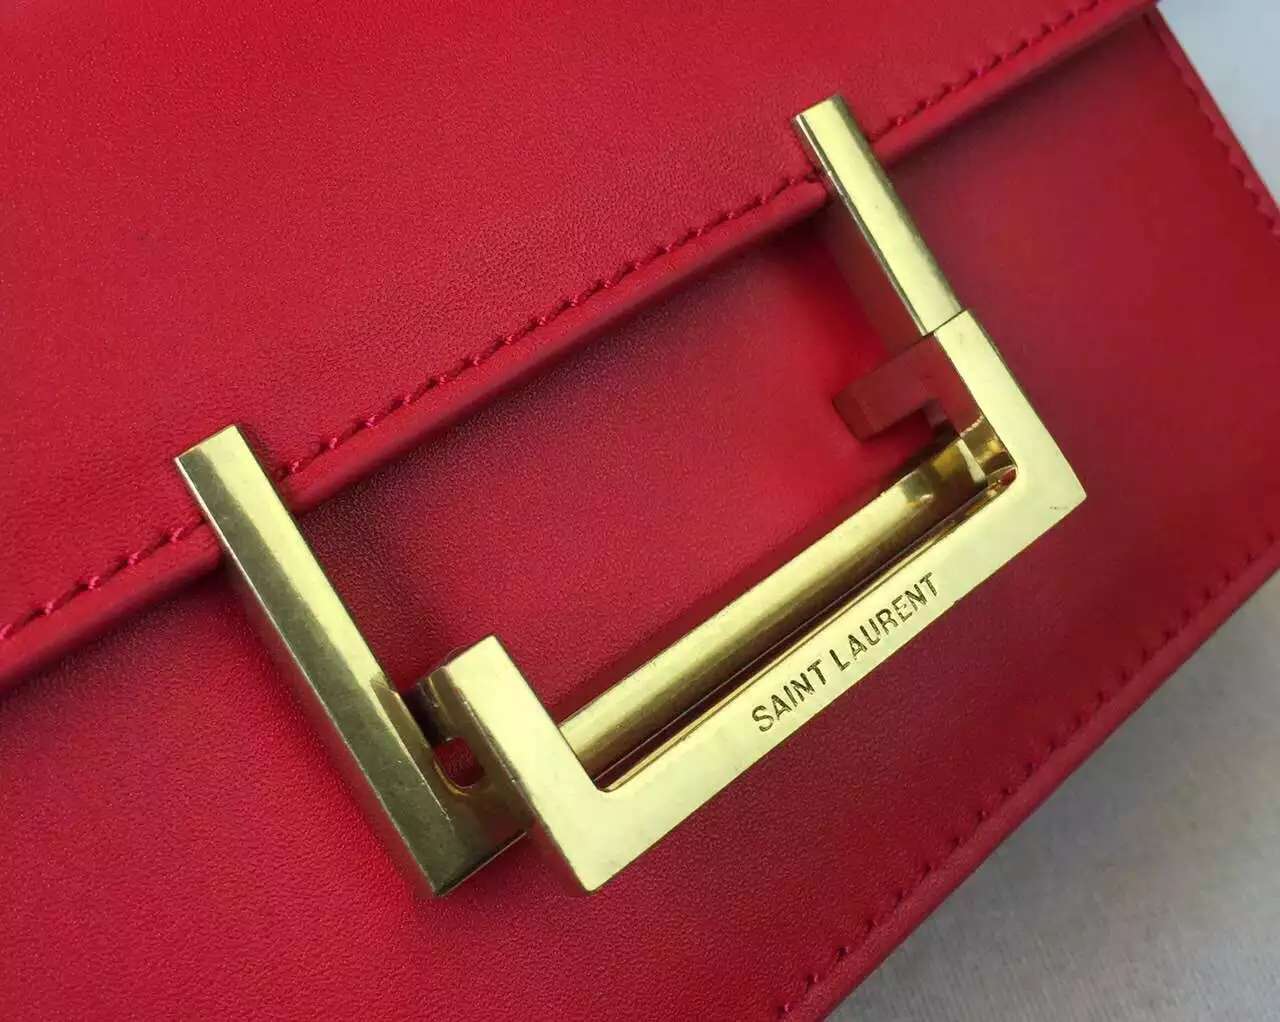 2015 Cheap YSL Out-Sale with Free Shipping-Saint Laurent Classic Small Lulu Leather Bag in Red Calfskin Leather - Click Image to Close